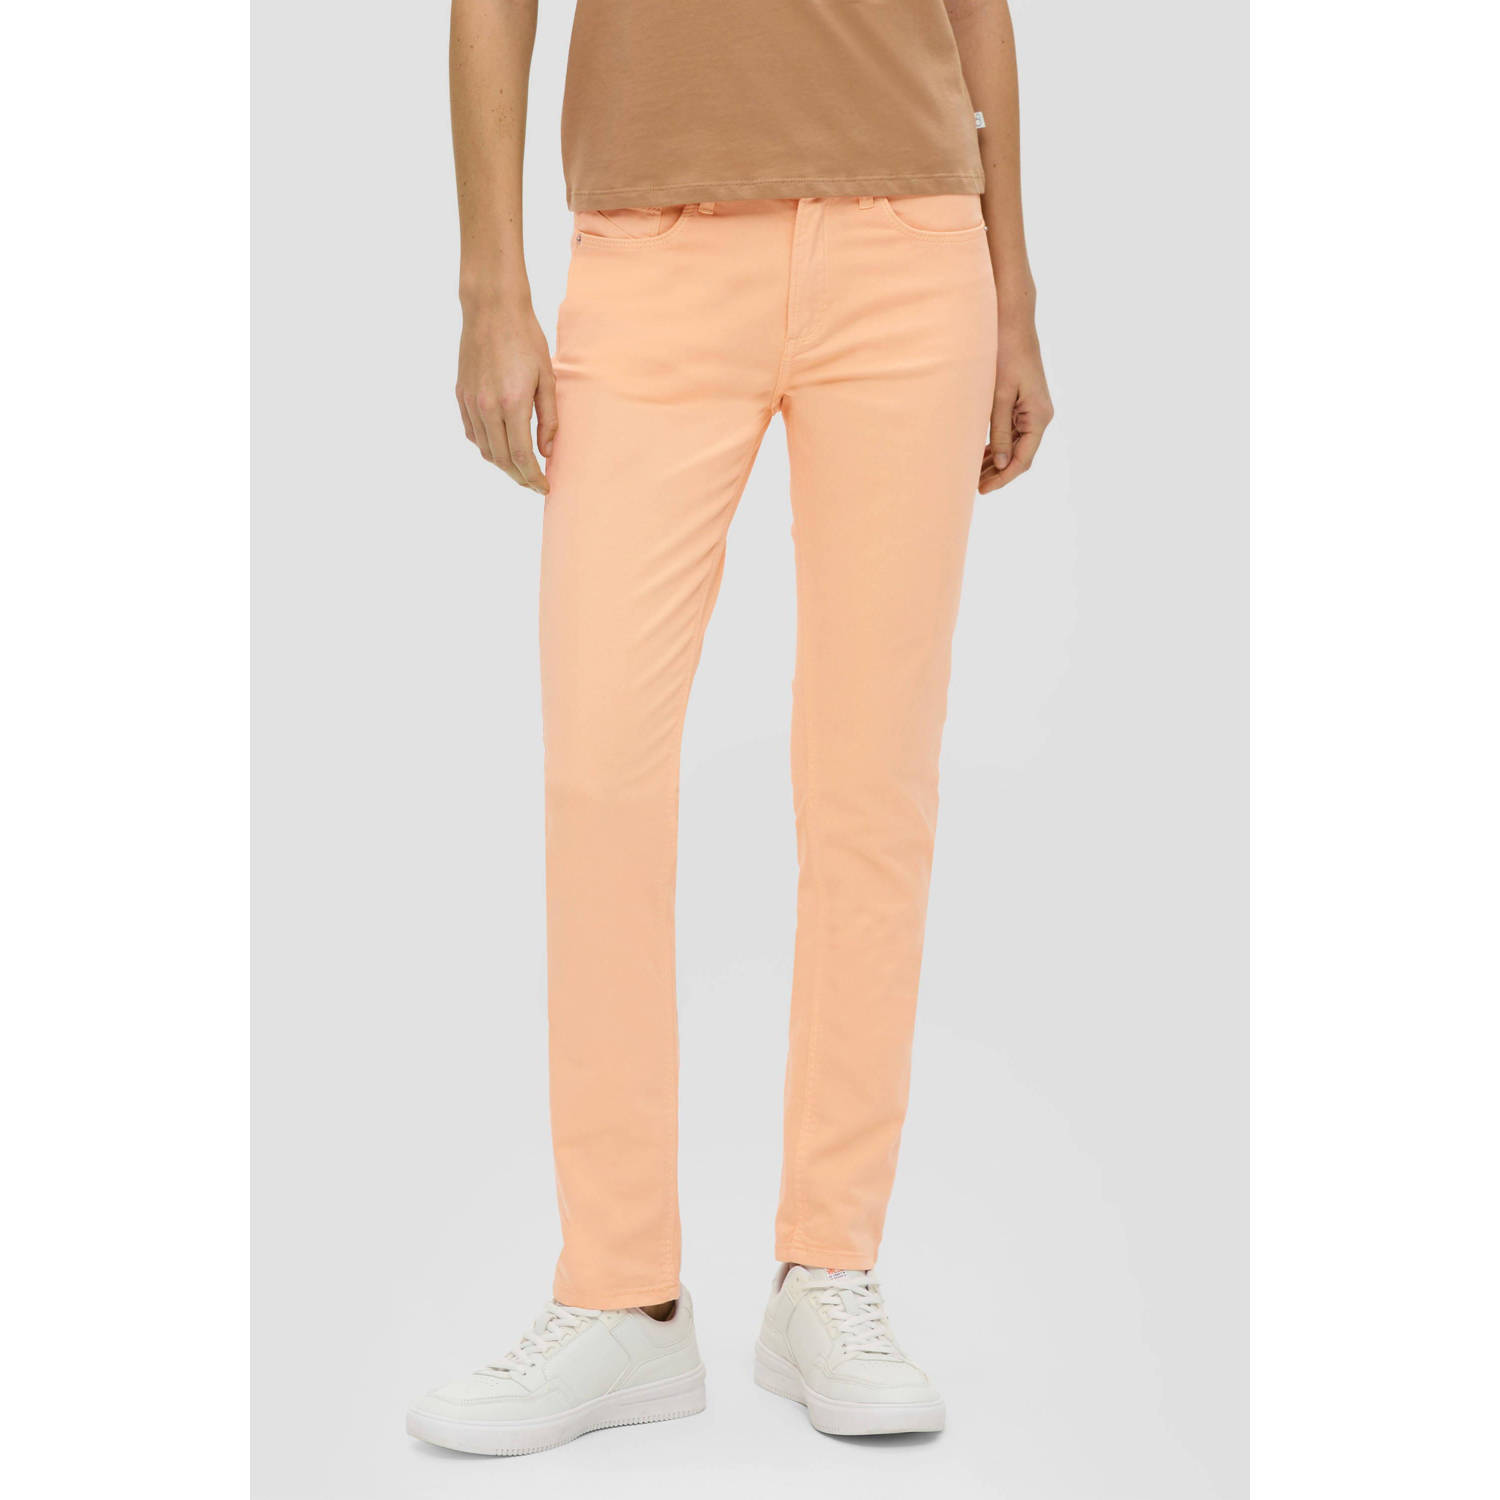 Q S by s.Oliver slim fit jeans zalm